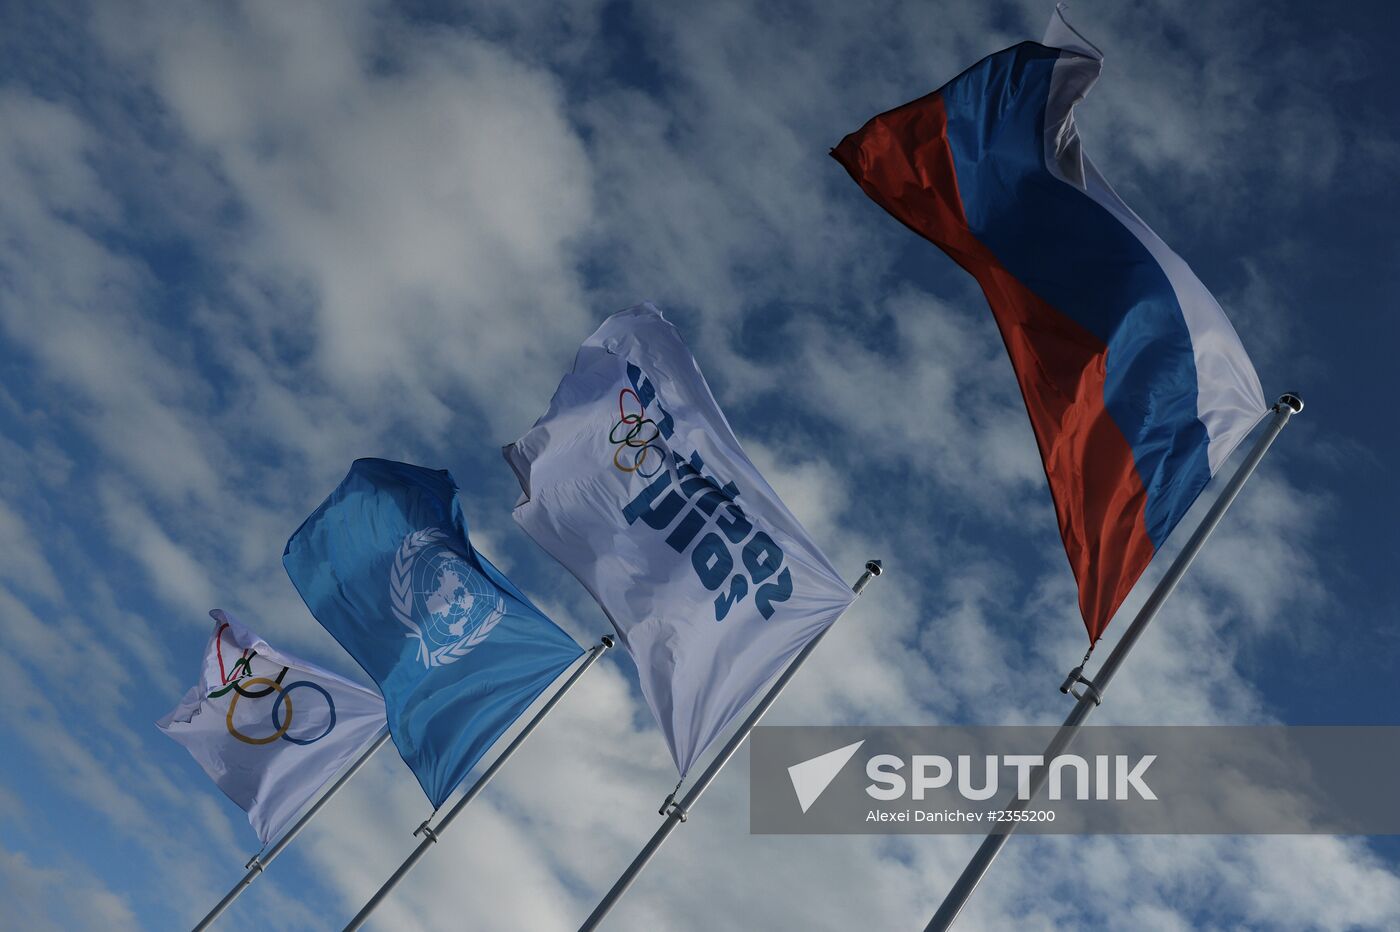 Sochi prepares to host 22 Winter Olympic Games